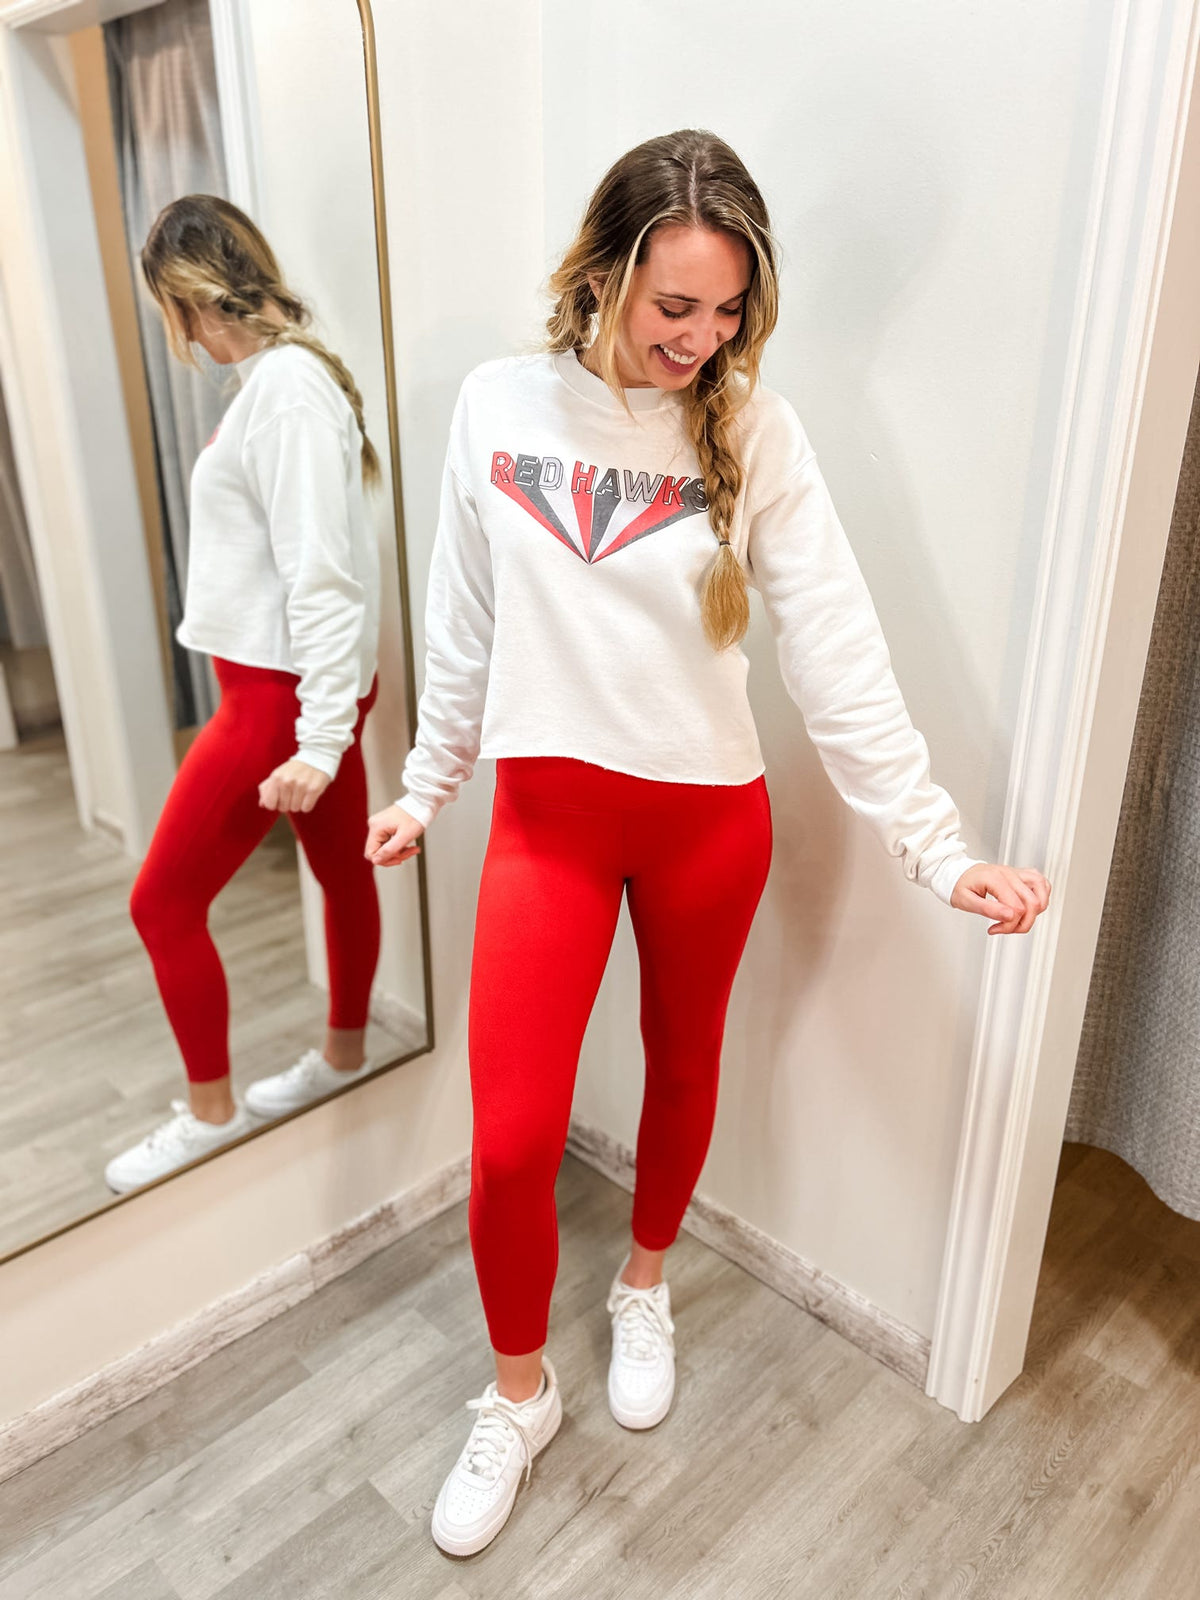 Redhawks Burst Cropped Sweatshirt-150 Hoodies/Pullovers-Mamie Ruth-Peachy Keen Boutique, Women's Fashion Boutique, Located in Cape Girardeau and Dexter, MO